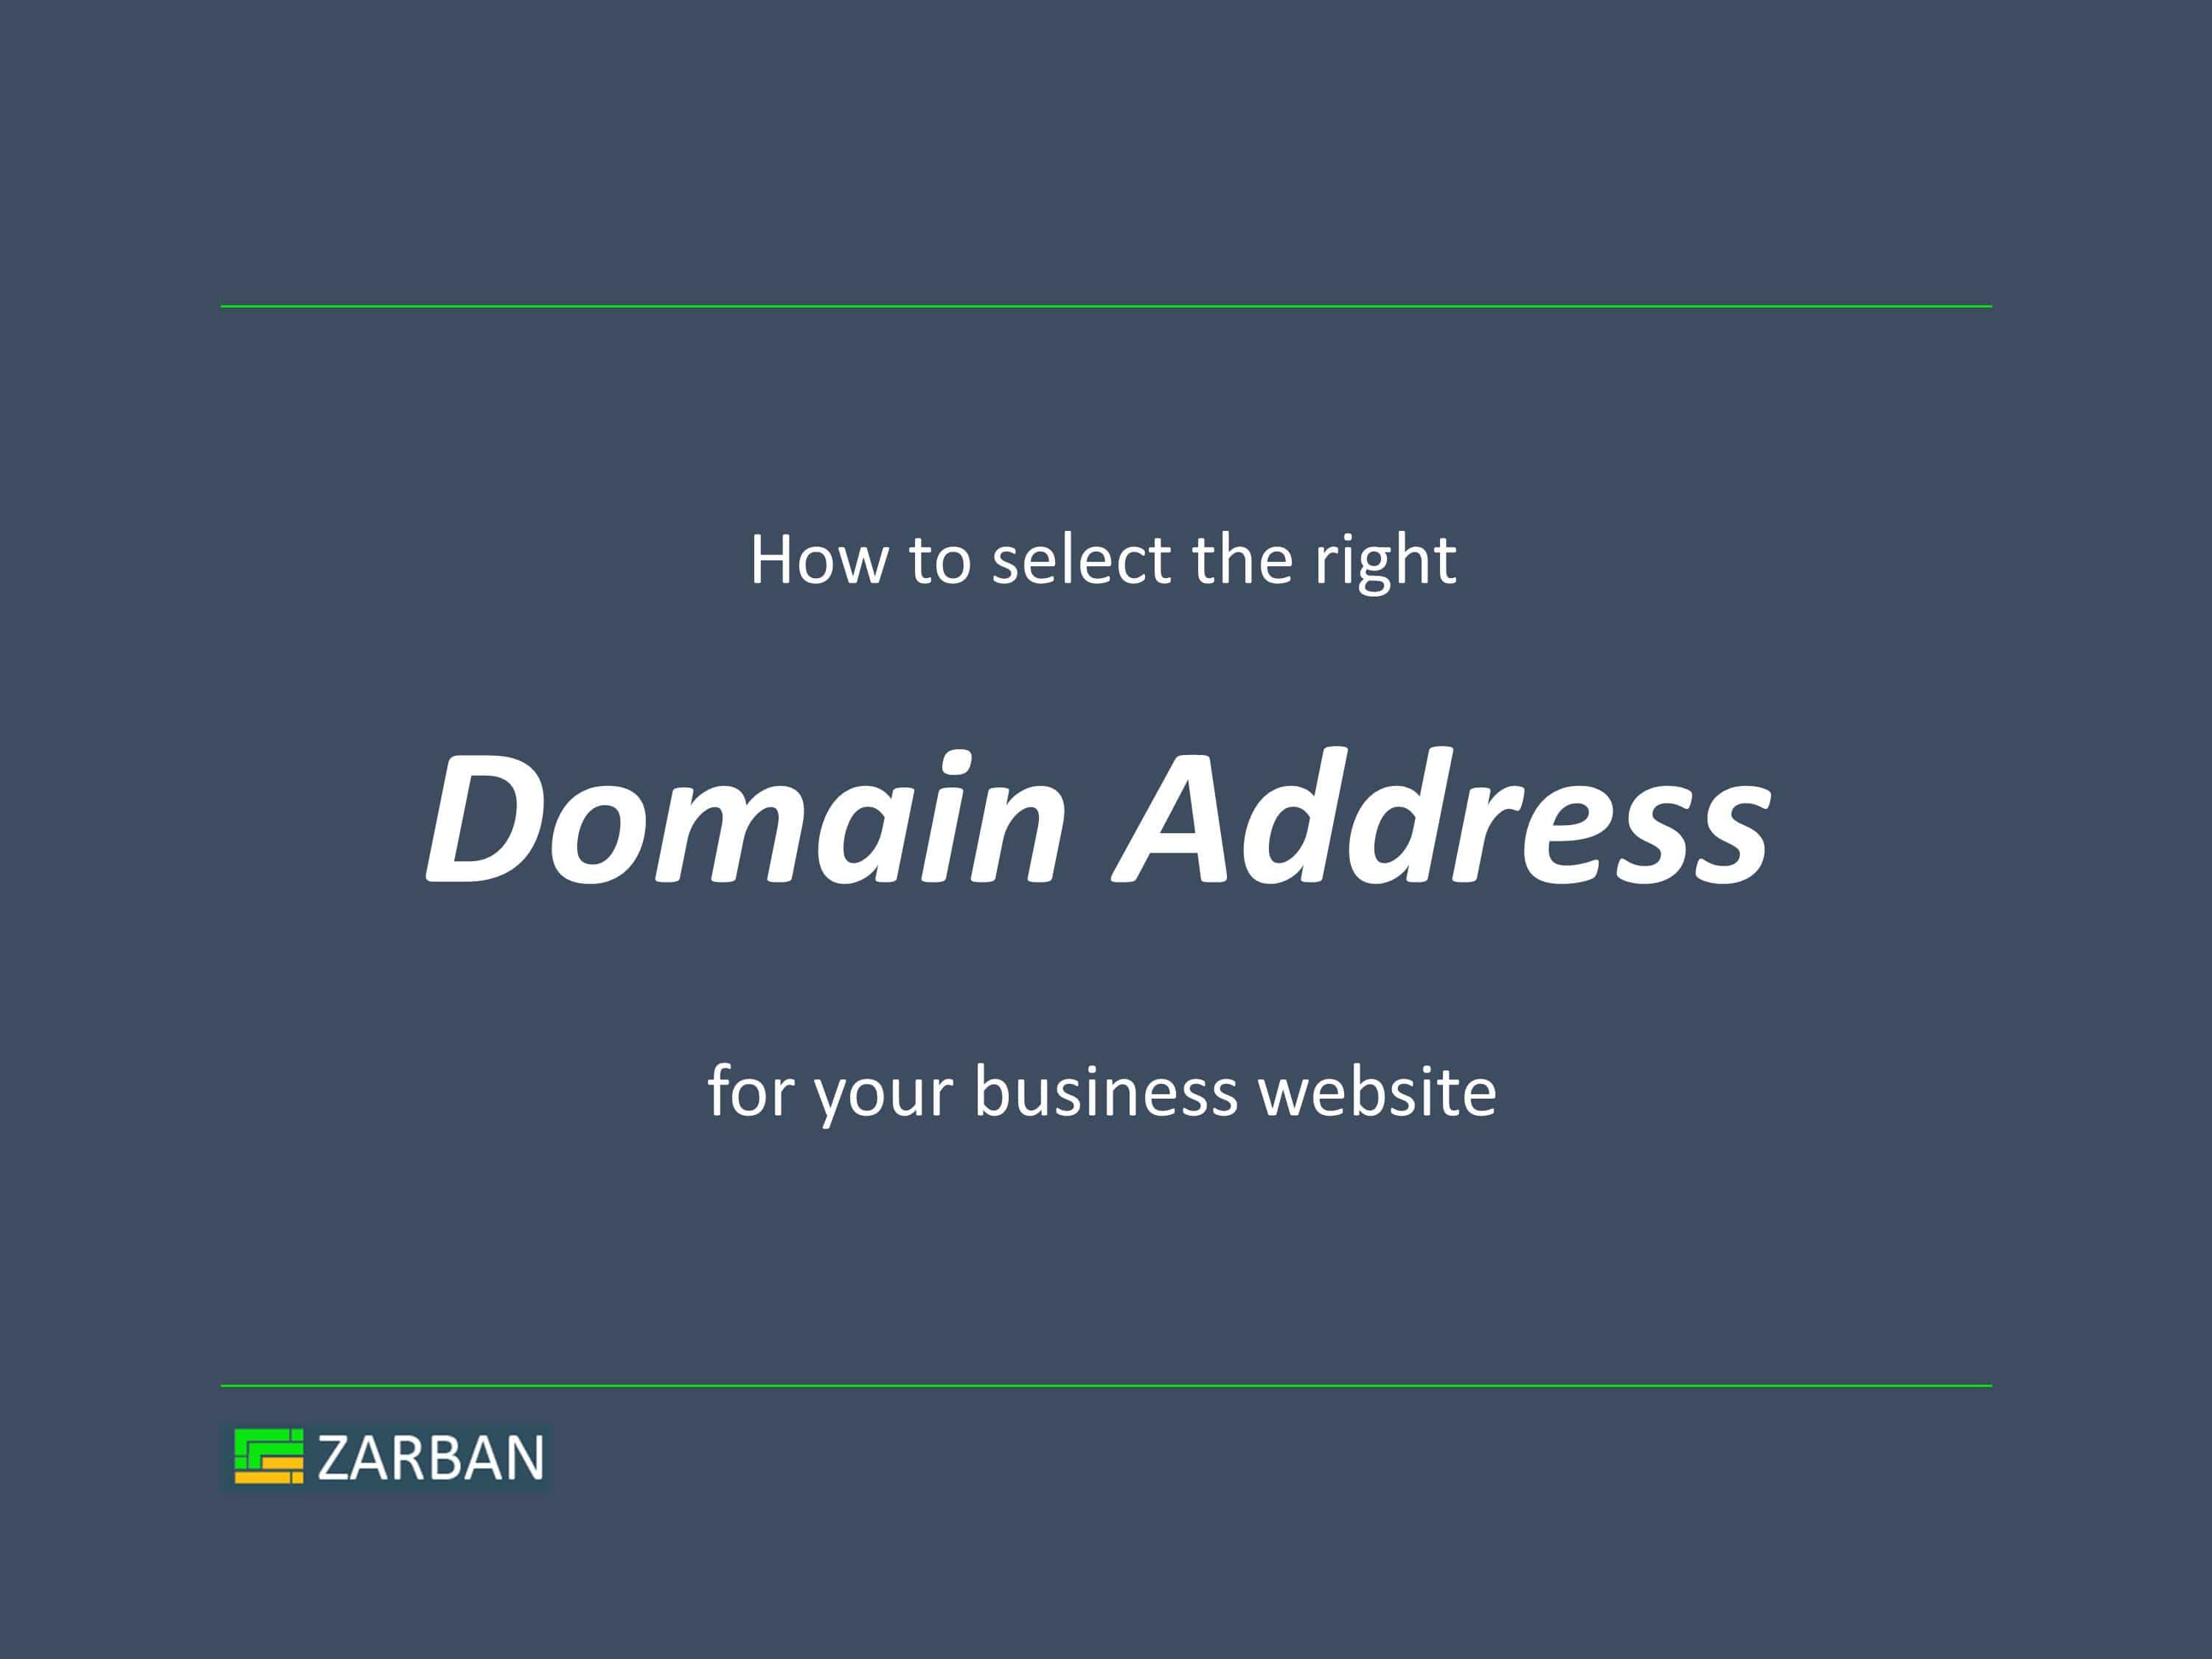 How to select the right domain name for your business website